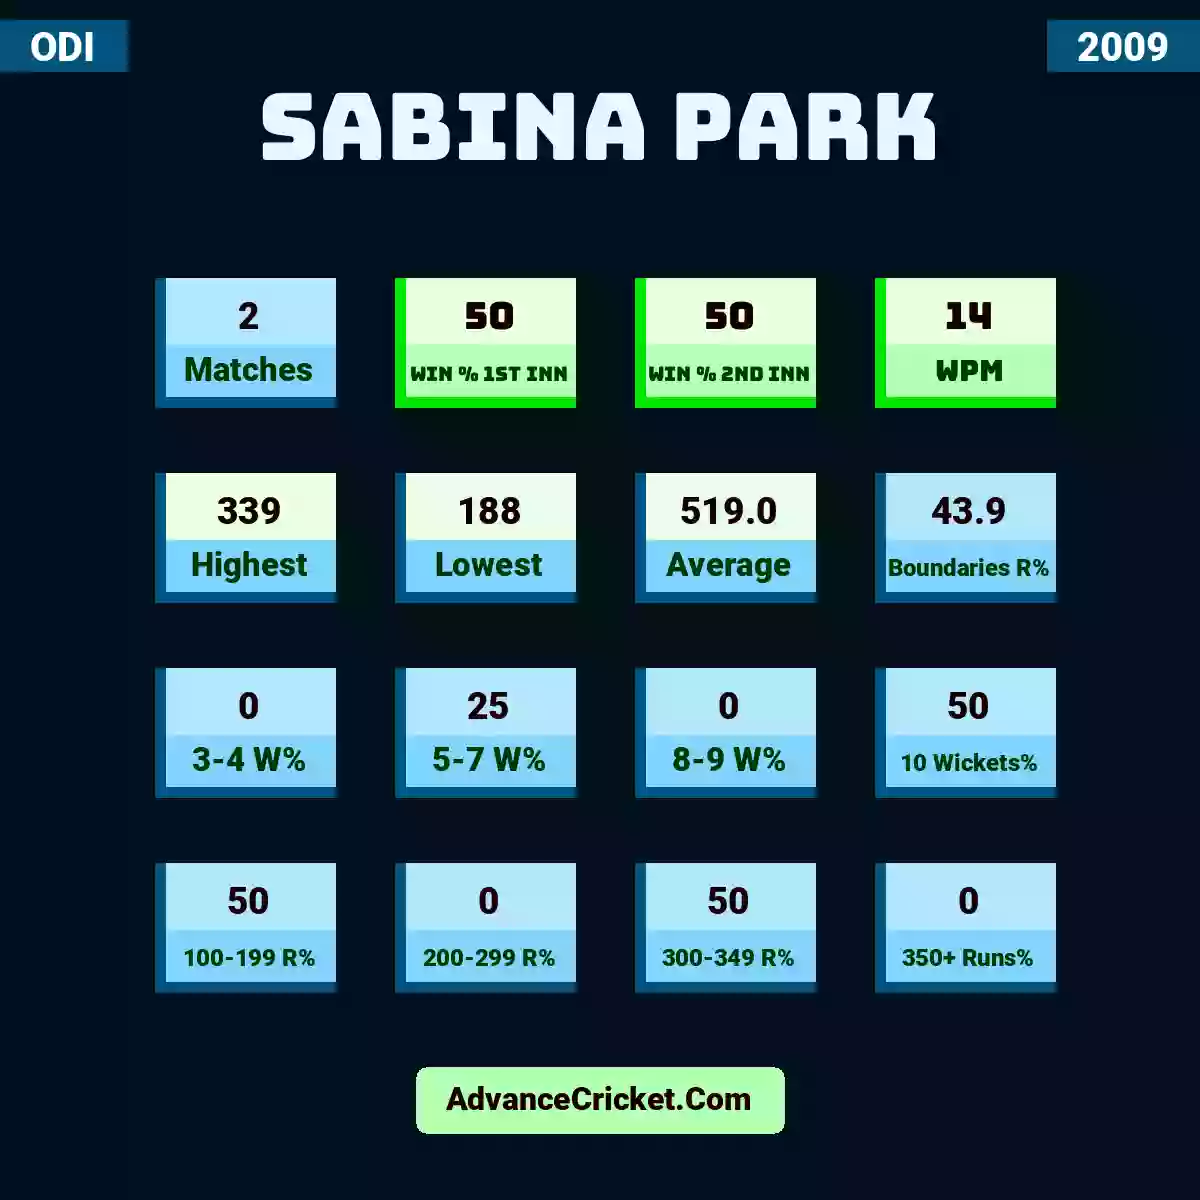 Image showing Sabina Park with Matches: 2, Win % 1st Inn: 50, Win % 2nd Inn: 50, WPM: 14, Highest: 339, Lowest: 188, Average: 519.0, Boundaries R%: 43.9, 3-4 W%: 0, 5-7 W%: 25, 8-9 W%: 0, 10 Wickets%: 50, 100-199 R%: 50, 200-299 R%: 0, 300-349 R%: 50, 350+ Runs%: 0.